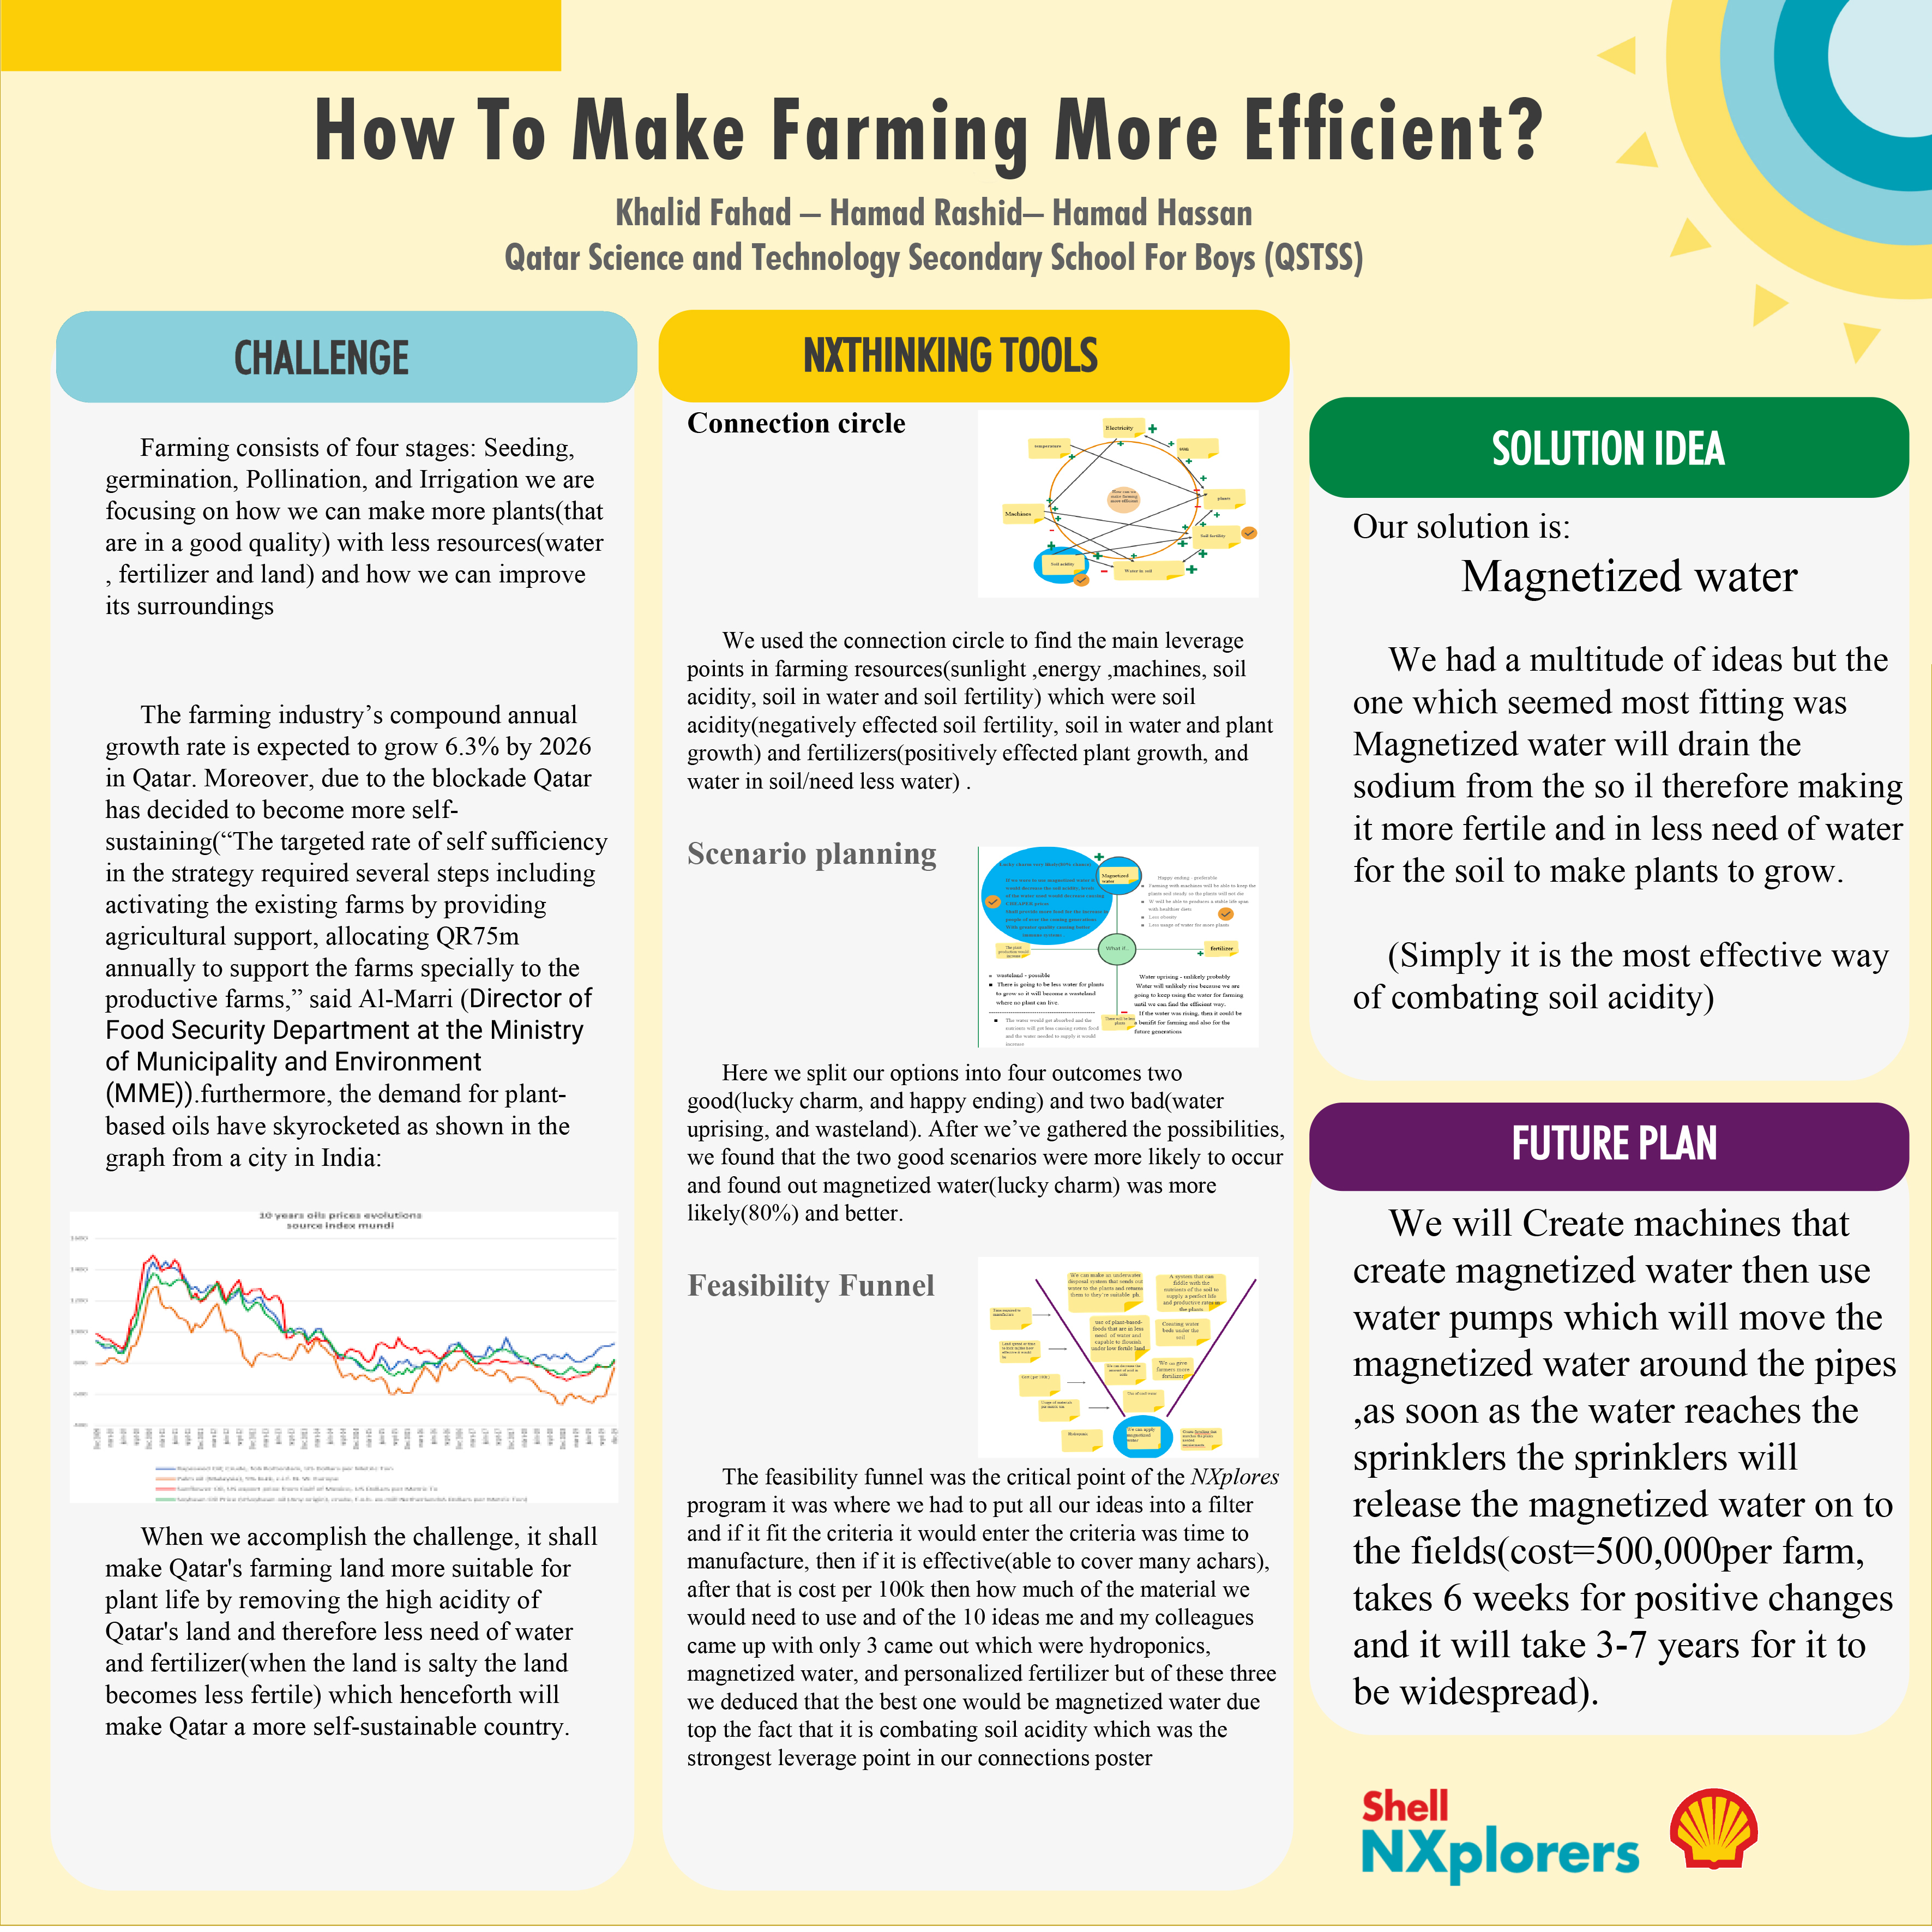 How to make farming more efficient?